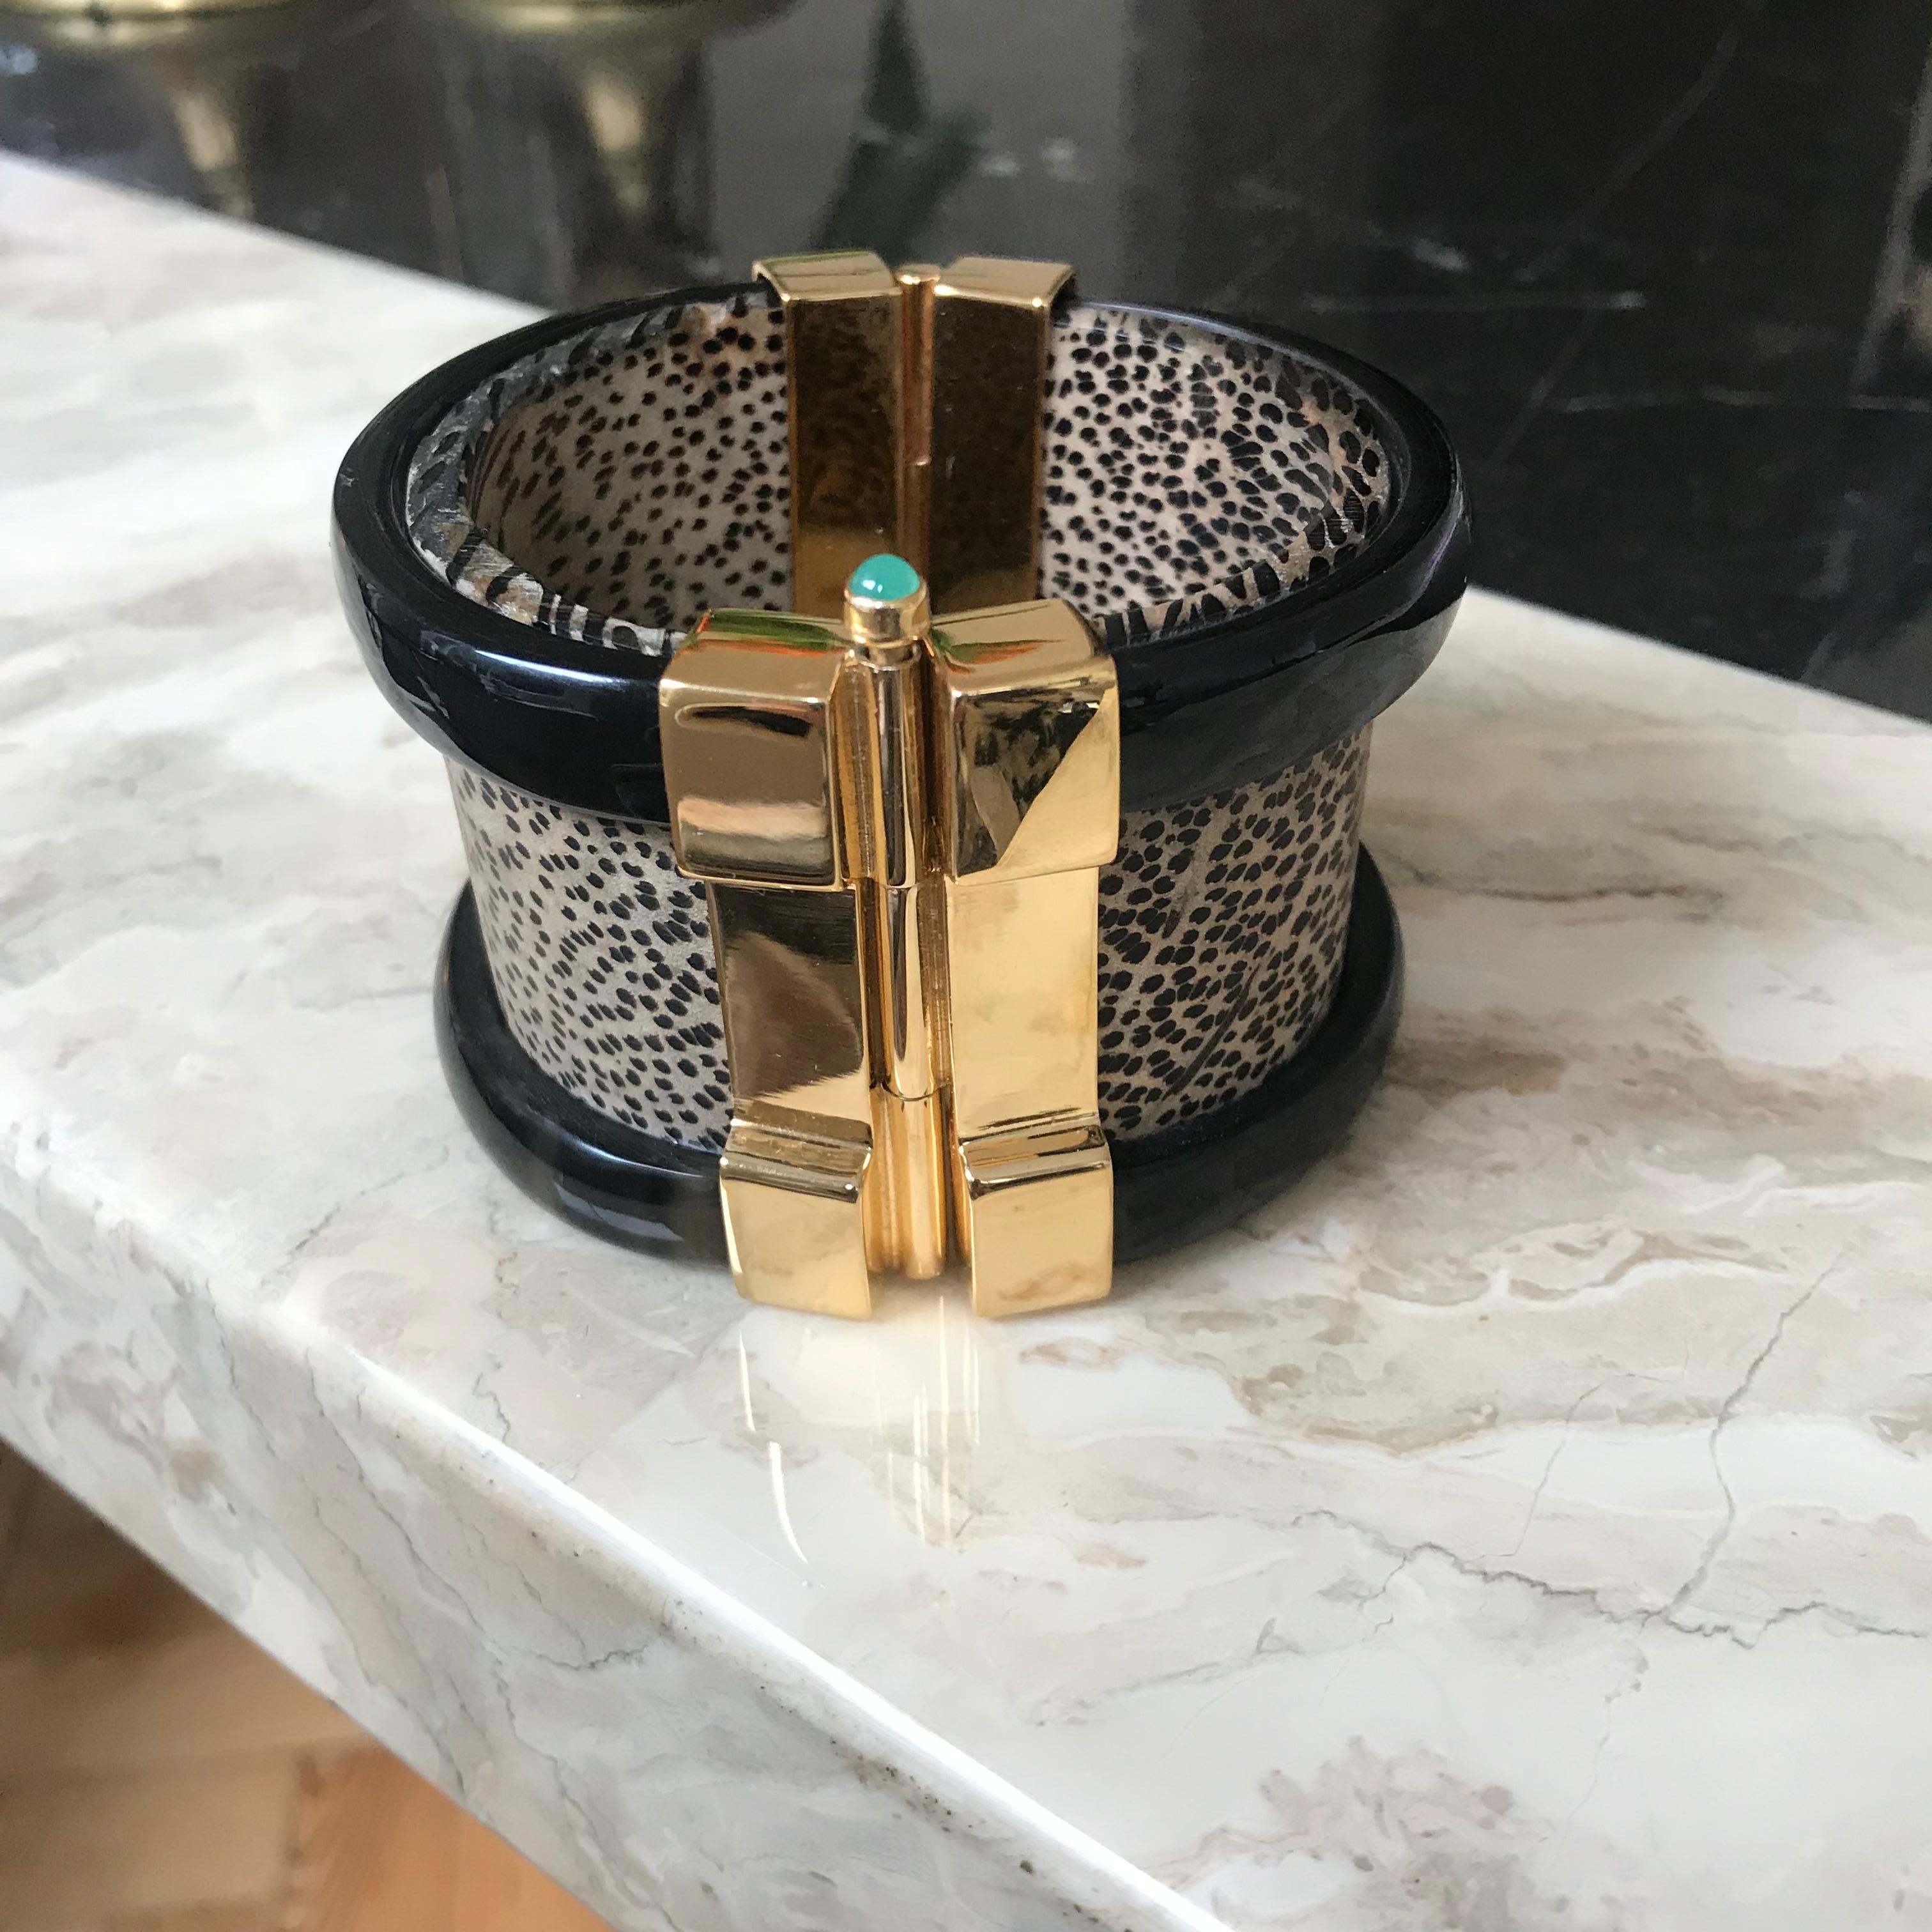 Cuff bracelet crafted from African wood and cow horn. The customizable 18k gold plated pin-clasp is set with a choice of ruby or emerald cabochon. Inspired by warrior style cuffs worn by former Vogue editor Diana Vreeland. 

Hand crafted by artisans